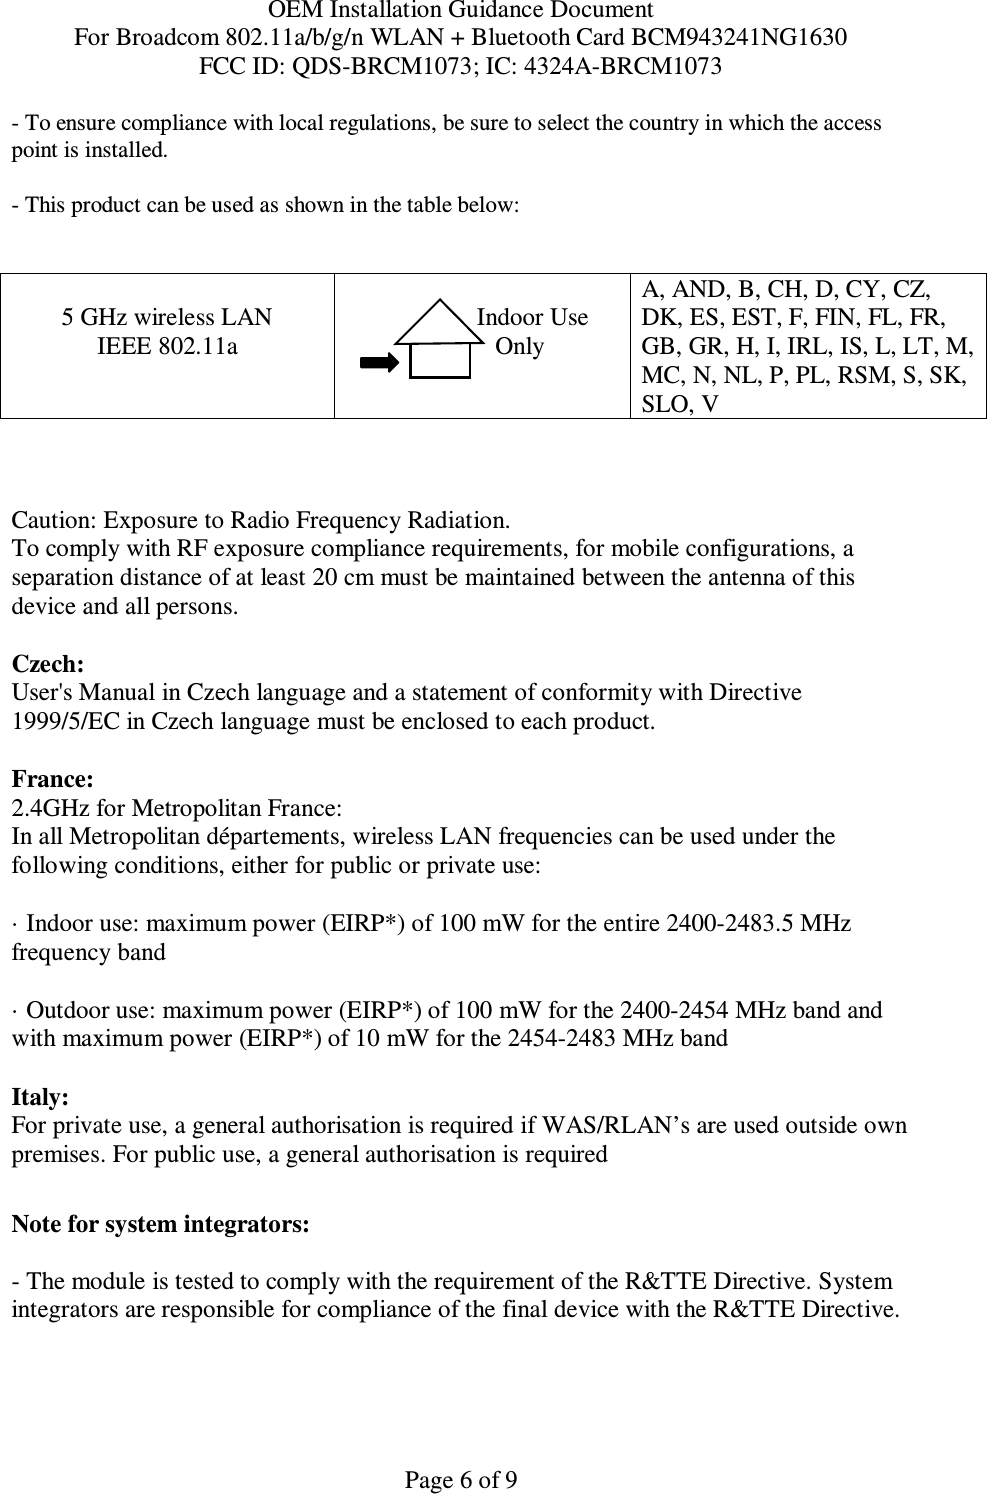 OEM Installation Guidance Document For Broadcom 802.11a/b/g/n WLAN + Bluetooth Card BCM943241NG1630 FCC ID: QDS-BRCM1073; IC: 4324A-BRCM1073  Page 6 of 9 - To ensure compliance with local regulations, be sure to select the country in which the access point is installed. - This product can be used as shown in the table below:   5 GHz wireless LAN IEEE 802.11a                  Indoor Use             Only  A, AND, B, CH, D, CY, CZ, DK, ES, EST, F, FIN, FL, FR, GB, GR, H, I, IRL, IS, L, LT, M, MC, N, NL, P, PL, RSM, S, SK, SLO, V    Caution: Exposure to Radio Frequency Radiation.   To comply with RF exposure compliance requirements, for mobile configurations, a separation distance of at least 20 cm must be maintained between the antenna of this device and all persons.  Czech:  User&apos;s Manual in Czech language and a statement of conformity with Directive 1999/5/EC in Czech language must be enclosed to each product.   France: 2.4GHz for Metropolitan France:   In all Metropolitan départements, wireless LAN frequencies can be used under the following conditions, either for public or private use:  · Indoor use: maximum power (EIRP*) of 100 mW for the entire 2400-2483.5 MHz frequency band · Outdoor use: maximum power (EIRP*) of 100 mW for the 2400-2454 MHz band and with maximum power (EIRP*) of 10 mW for the 2454-2483 MHz band Italy:  For private use, a general authorisation is required if WAS/RLAN’s are used outside own premises. For public use, a general authorisation is required   Note for system integrators:   - The module is tested to comply with the requirement of the R&amp;TTE Directive. System integrators are responsible for compliance of the final device with the R&amp;TTE Directive.   